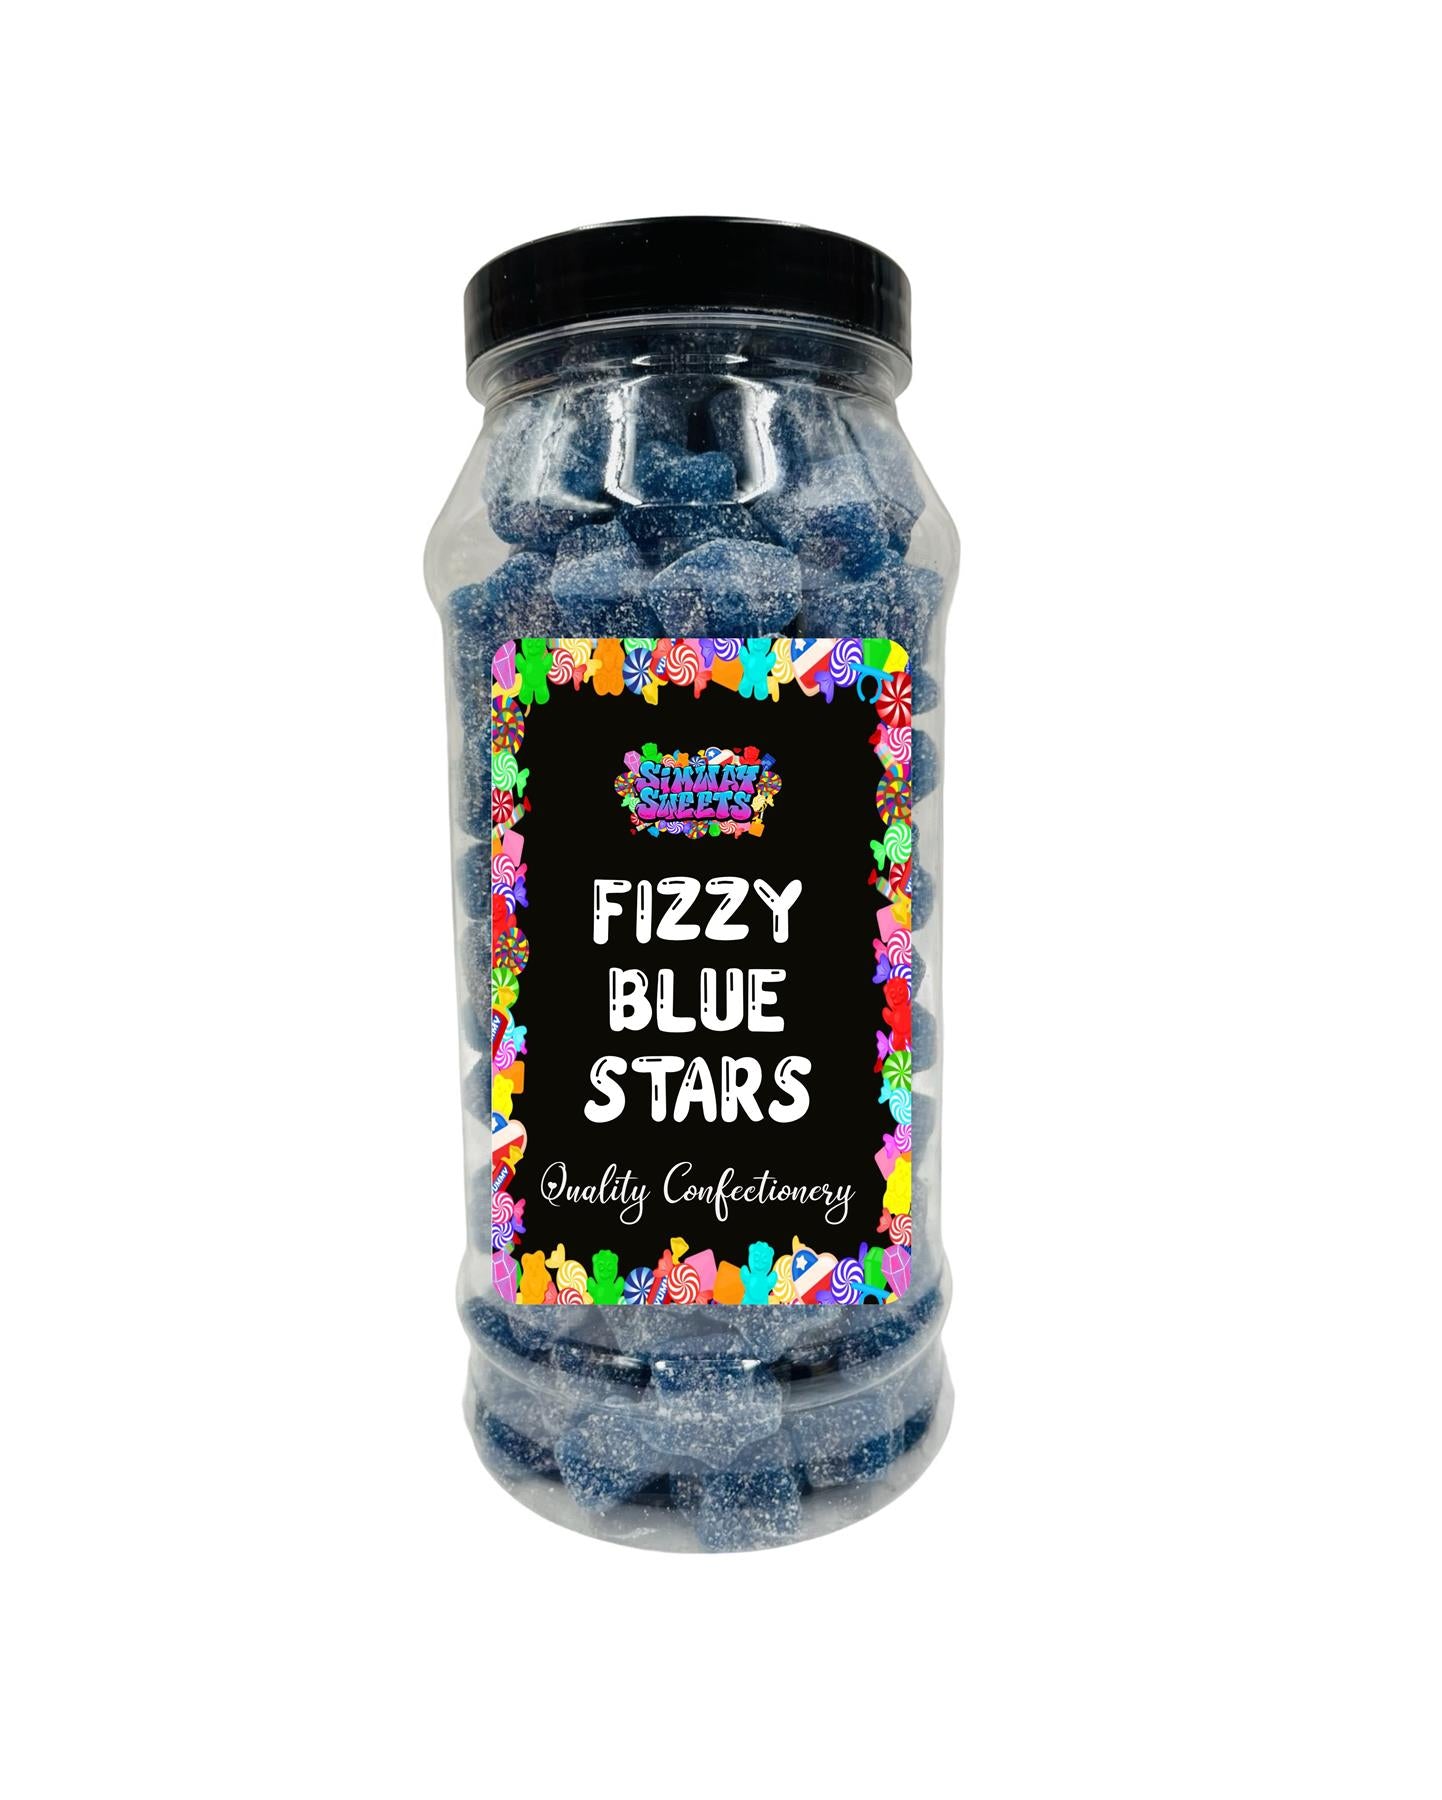 Fizzy Blue Stars Fizzies Retro Sweets Gift Jar Blue Sweets - 690g